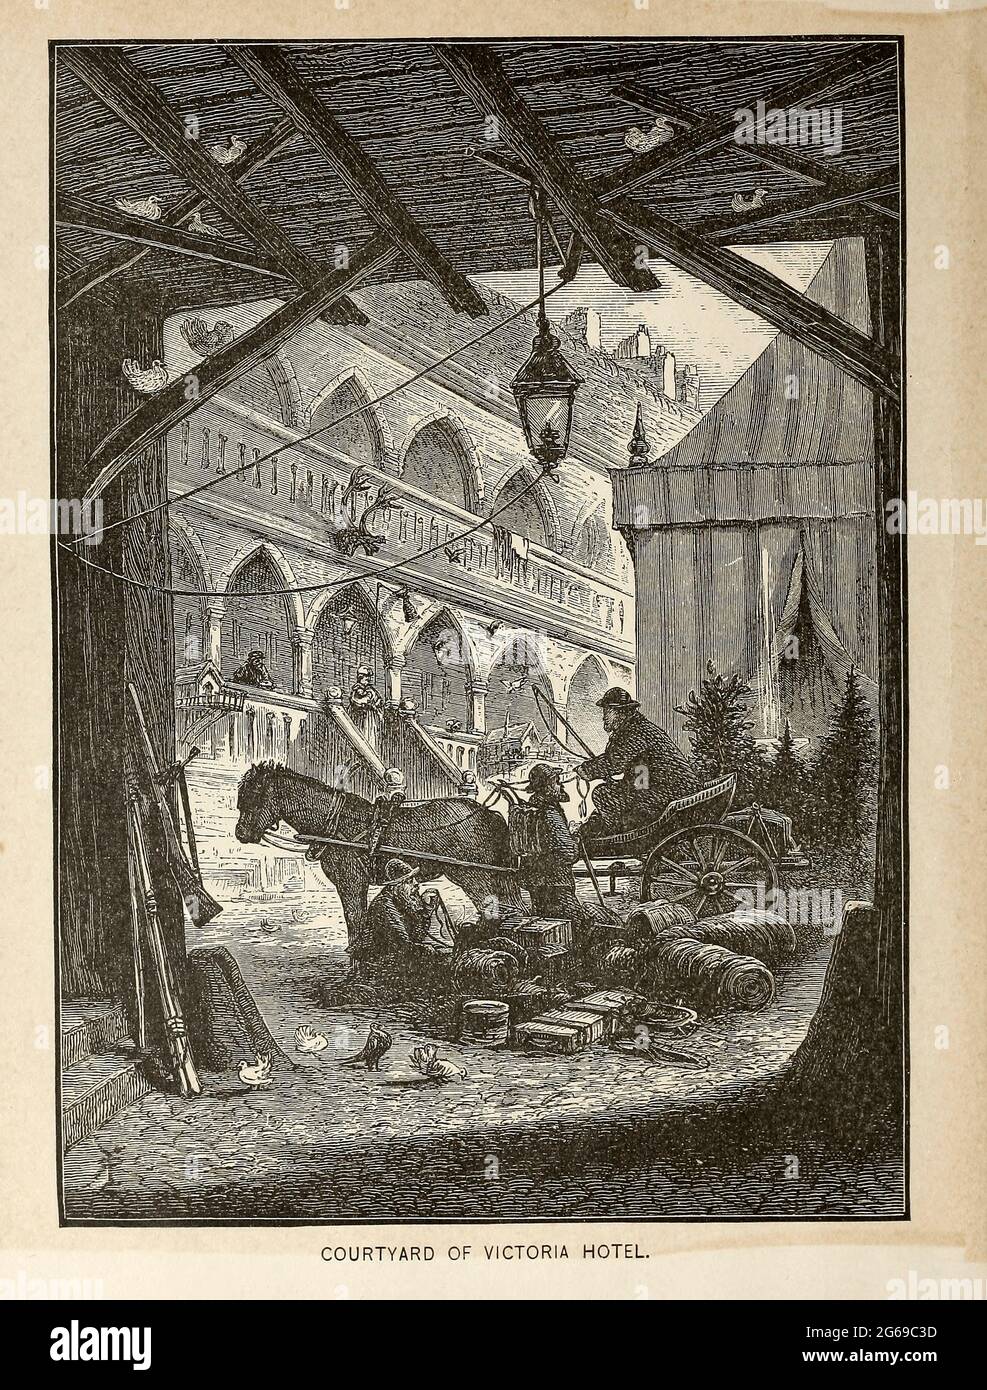 Courtyard of Victoria Hotel From the book ' The viking Bodleys; an excursion into Norway and Denmark ' by Horace Elisha Scudder Published in Boston, by Houghton, Mifflin and Company in 1885 from the BODLEY FAMILY series of books Stock Photo